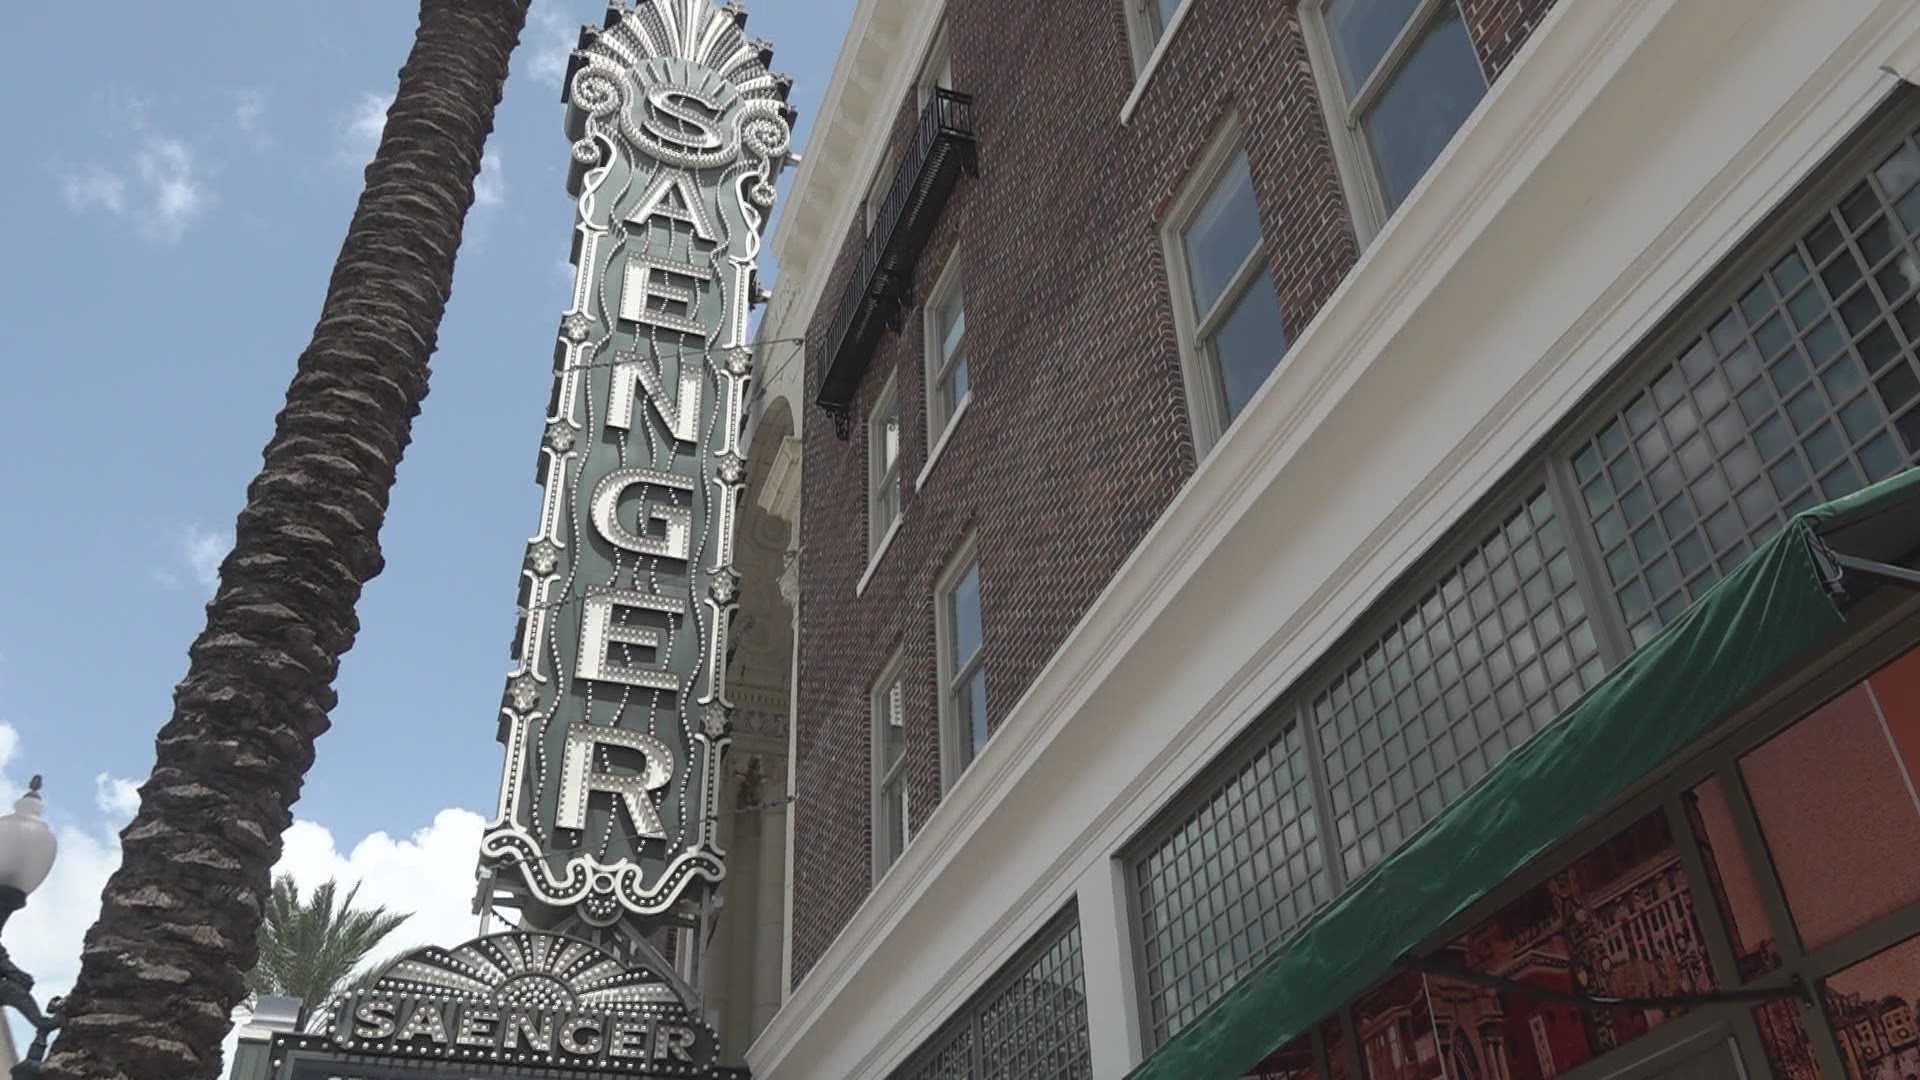 More than 20 months after the Hard Rock site collapsed, the street in front of the Saenger is still closed even though the theatre will soon open.